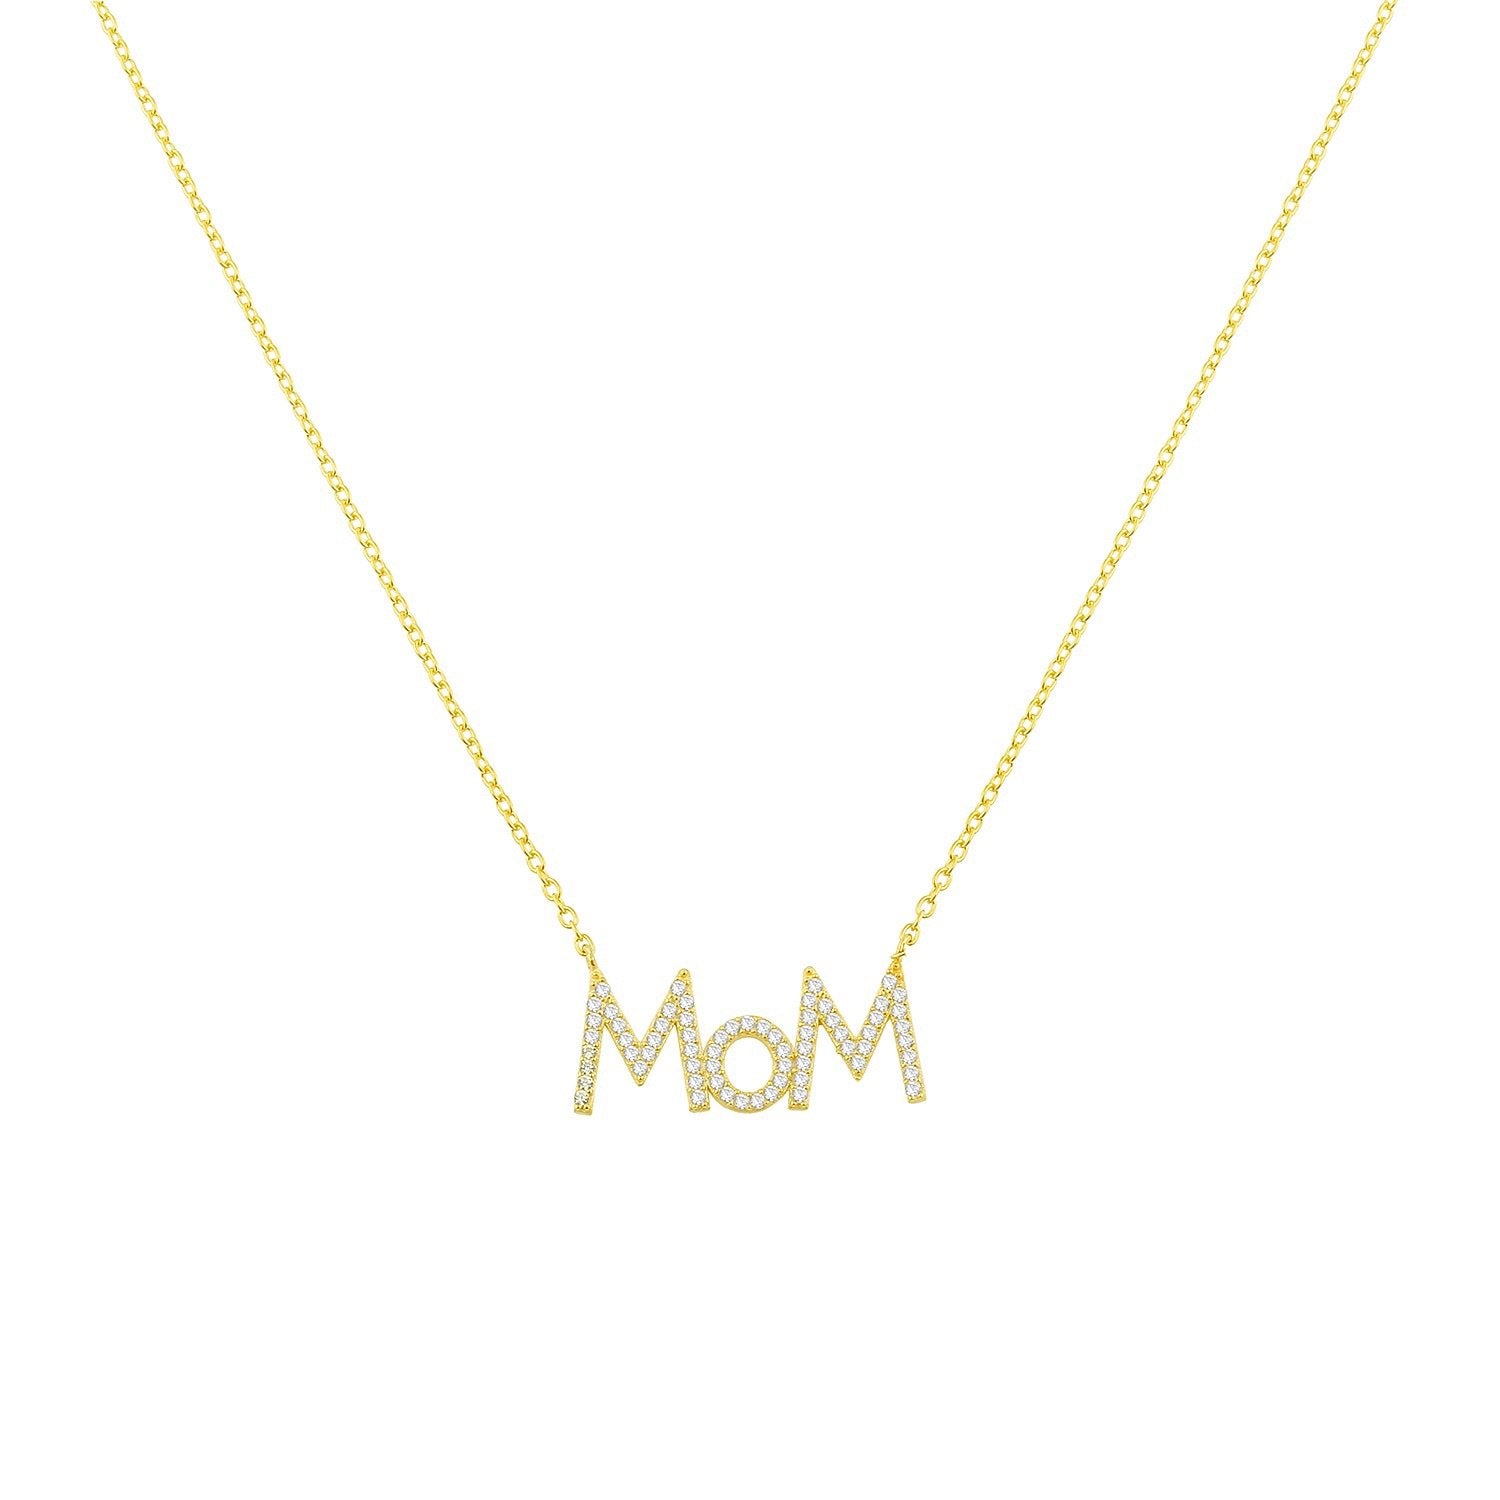 Mom Necklaces necklace The Sis Kiss MOM - Uppercase Gold with Crystals